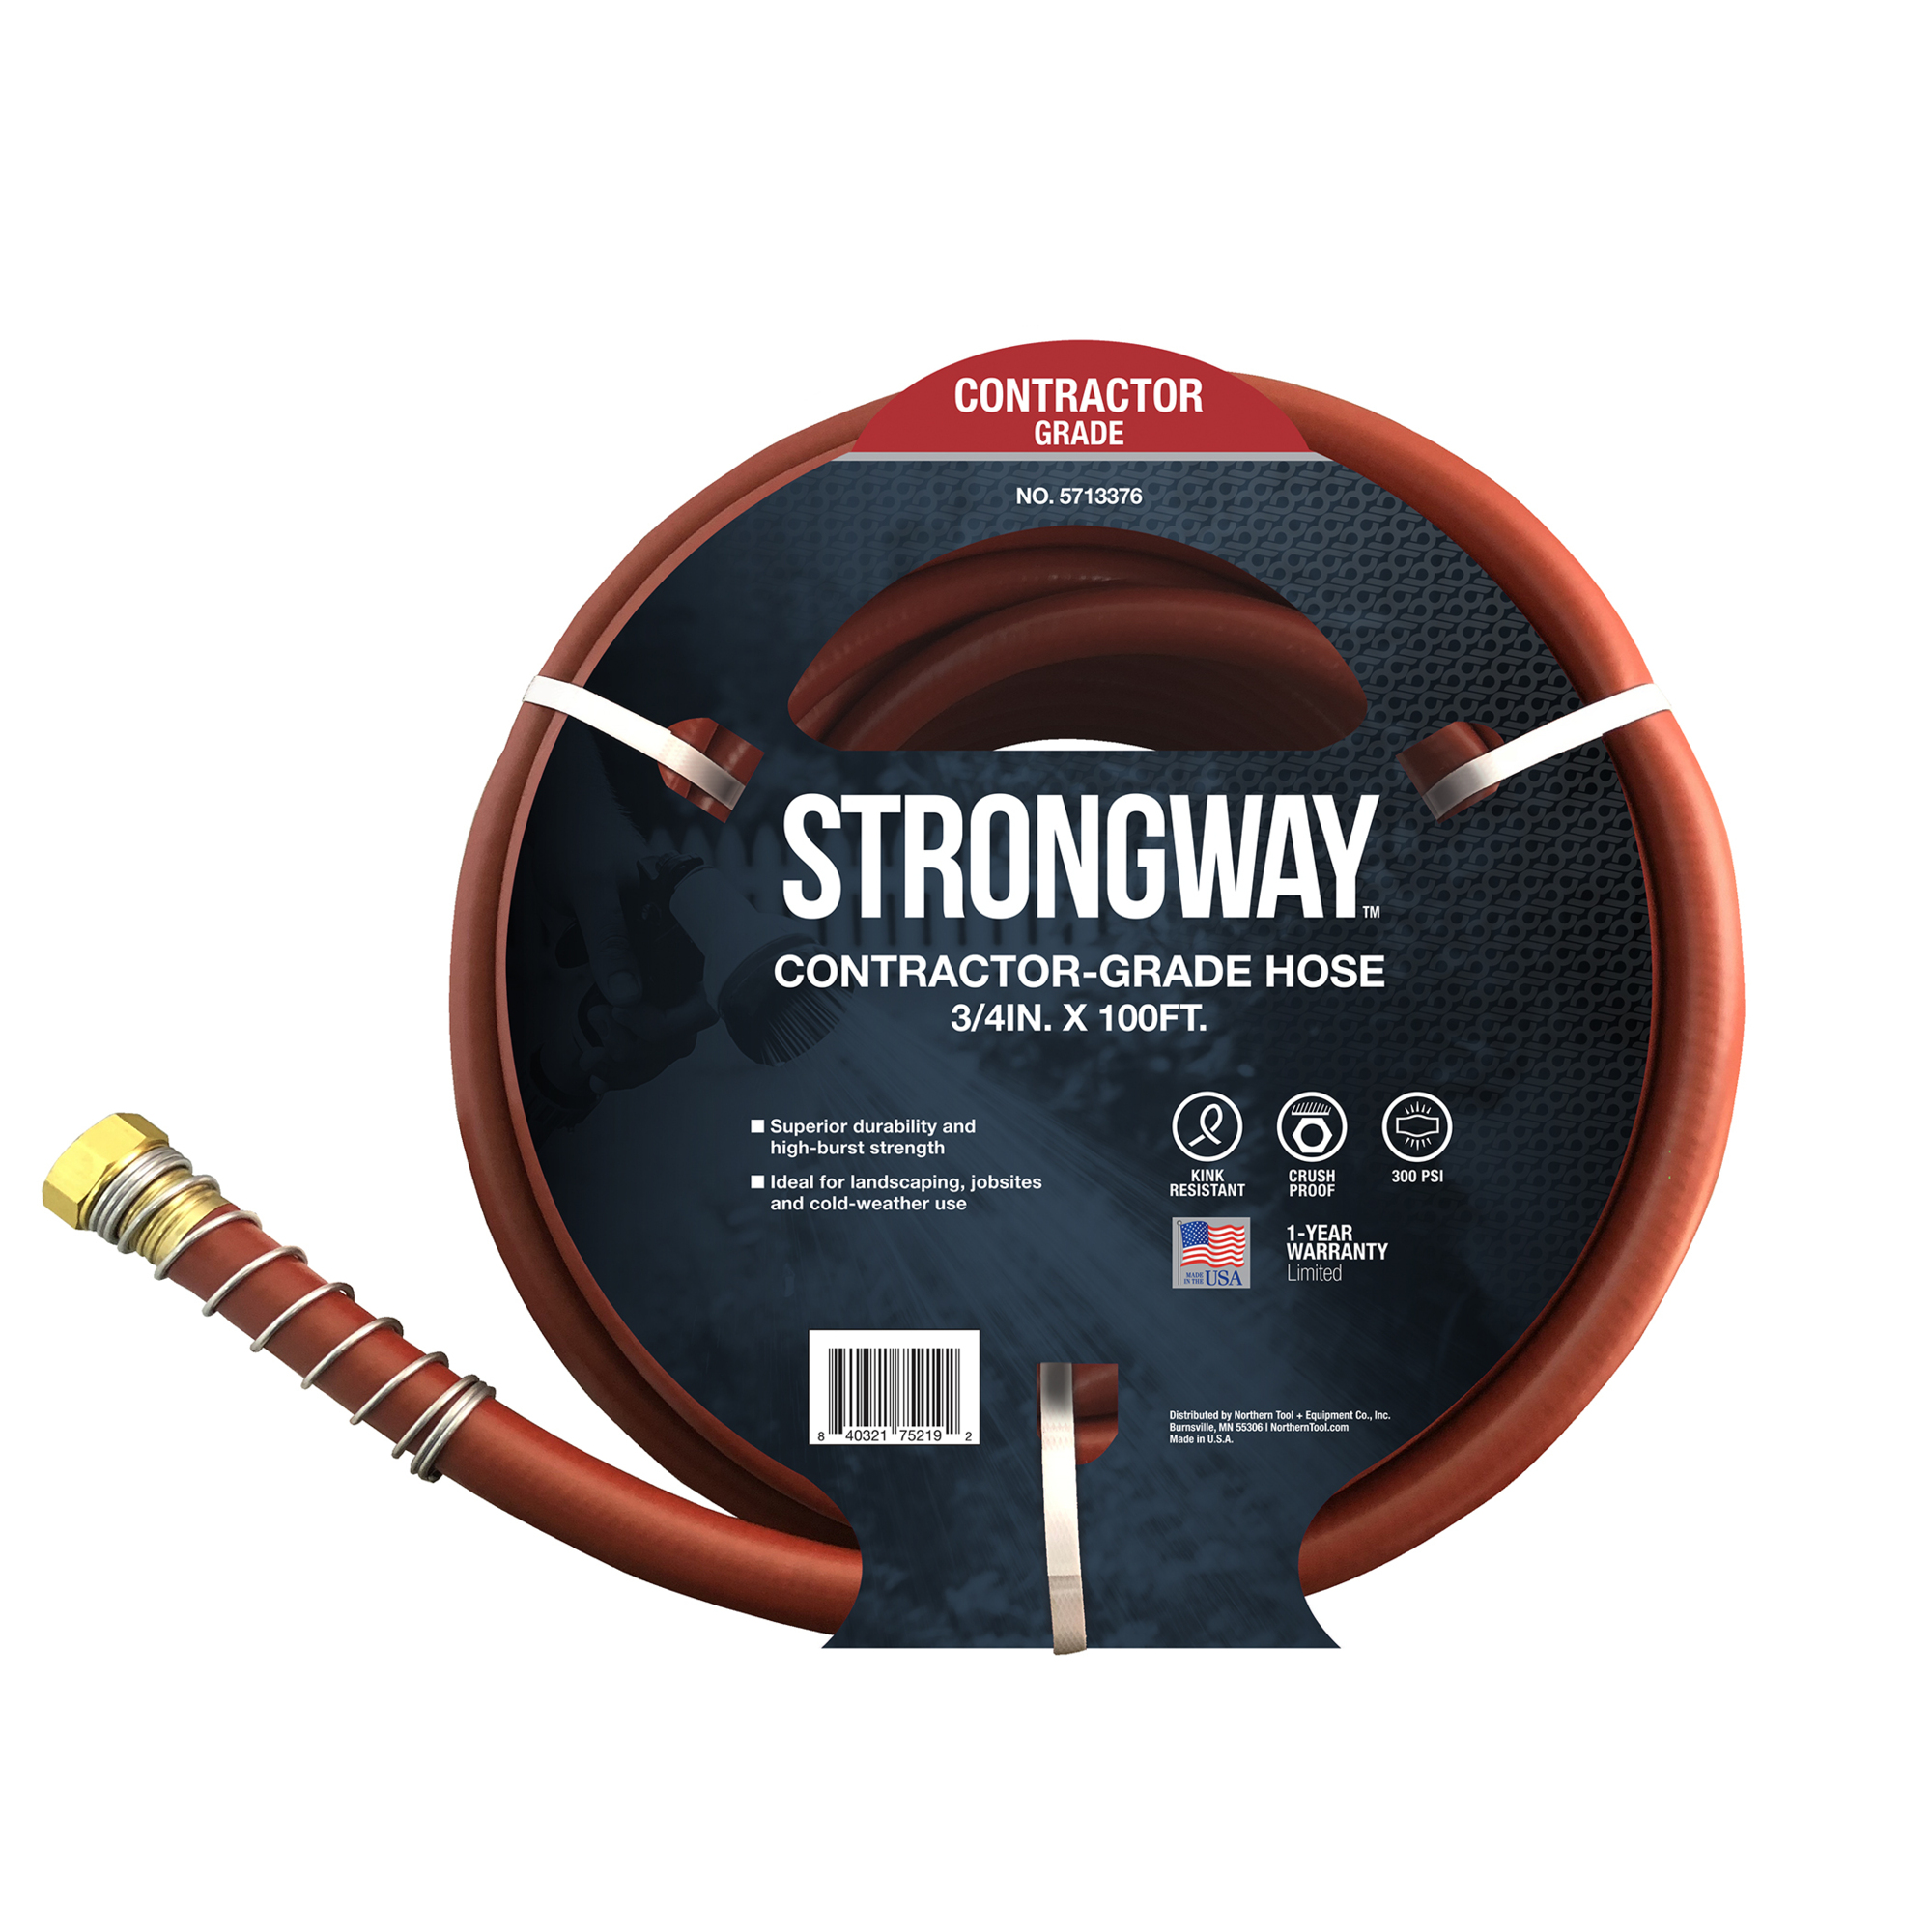 Strongway Contractor-Grade Water Hose, 3/4Inch x 100ft. 300 PSI